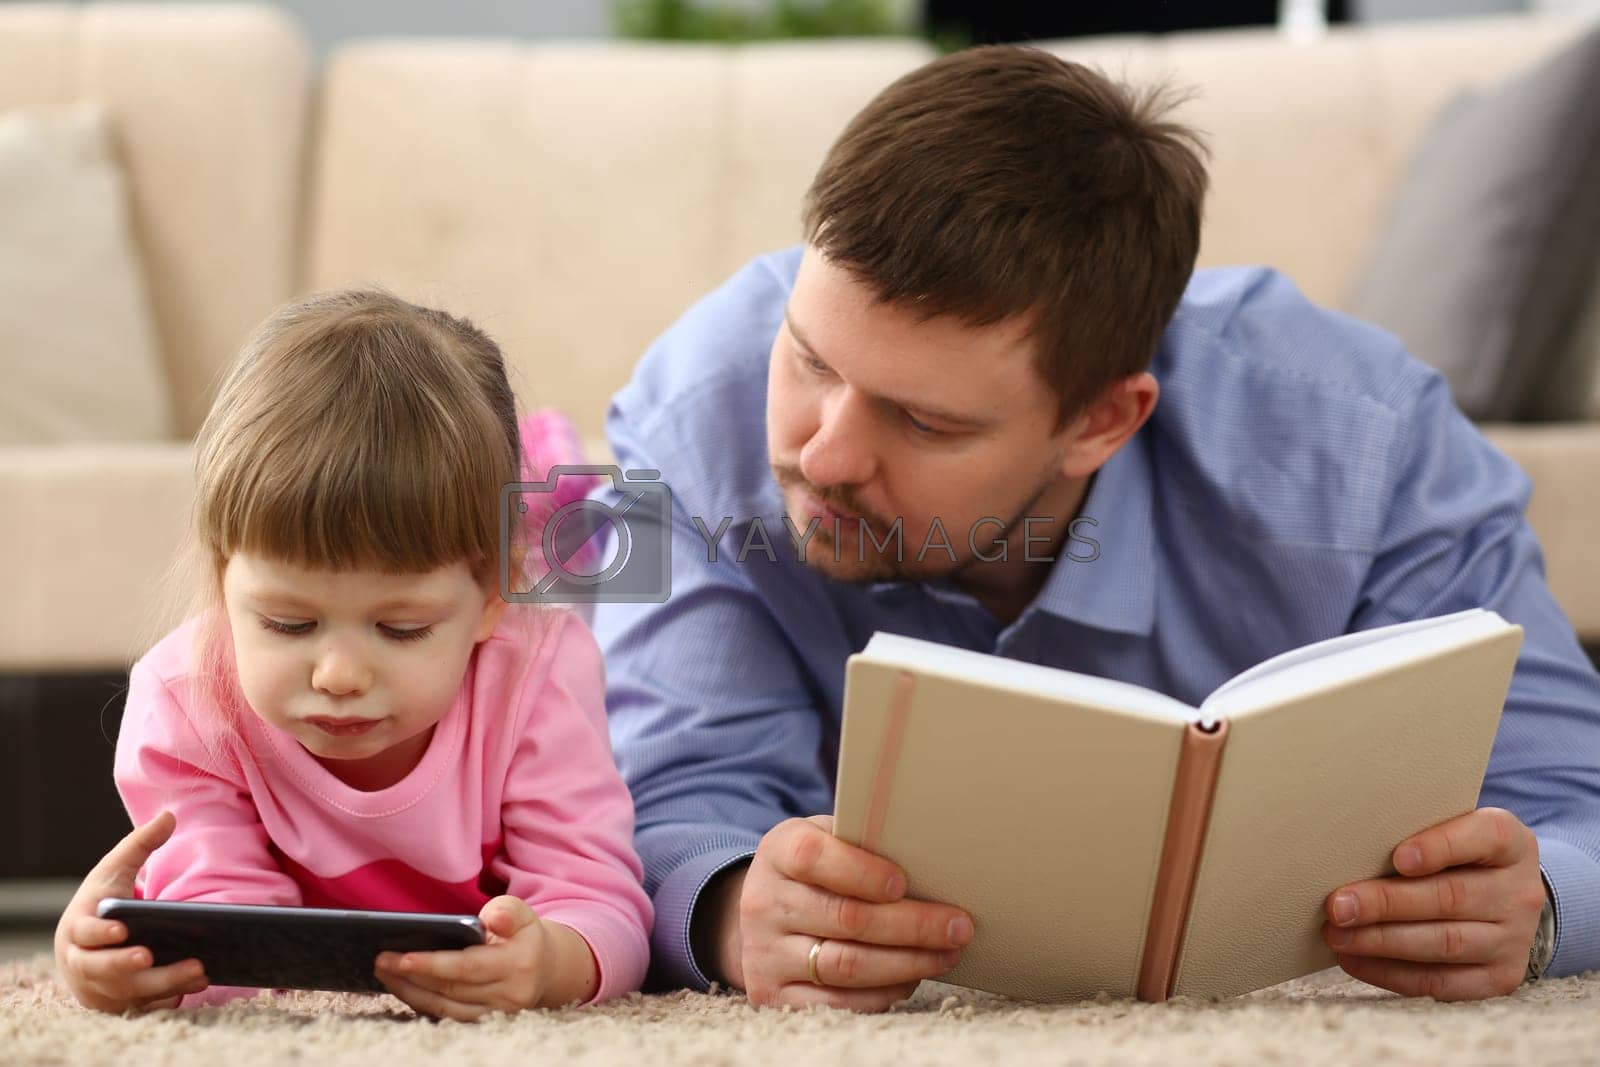 No more communication in family and dependence of children on gadgets. Dad holding book child is staring at smartphone screen